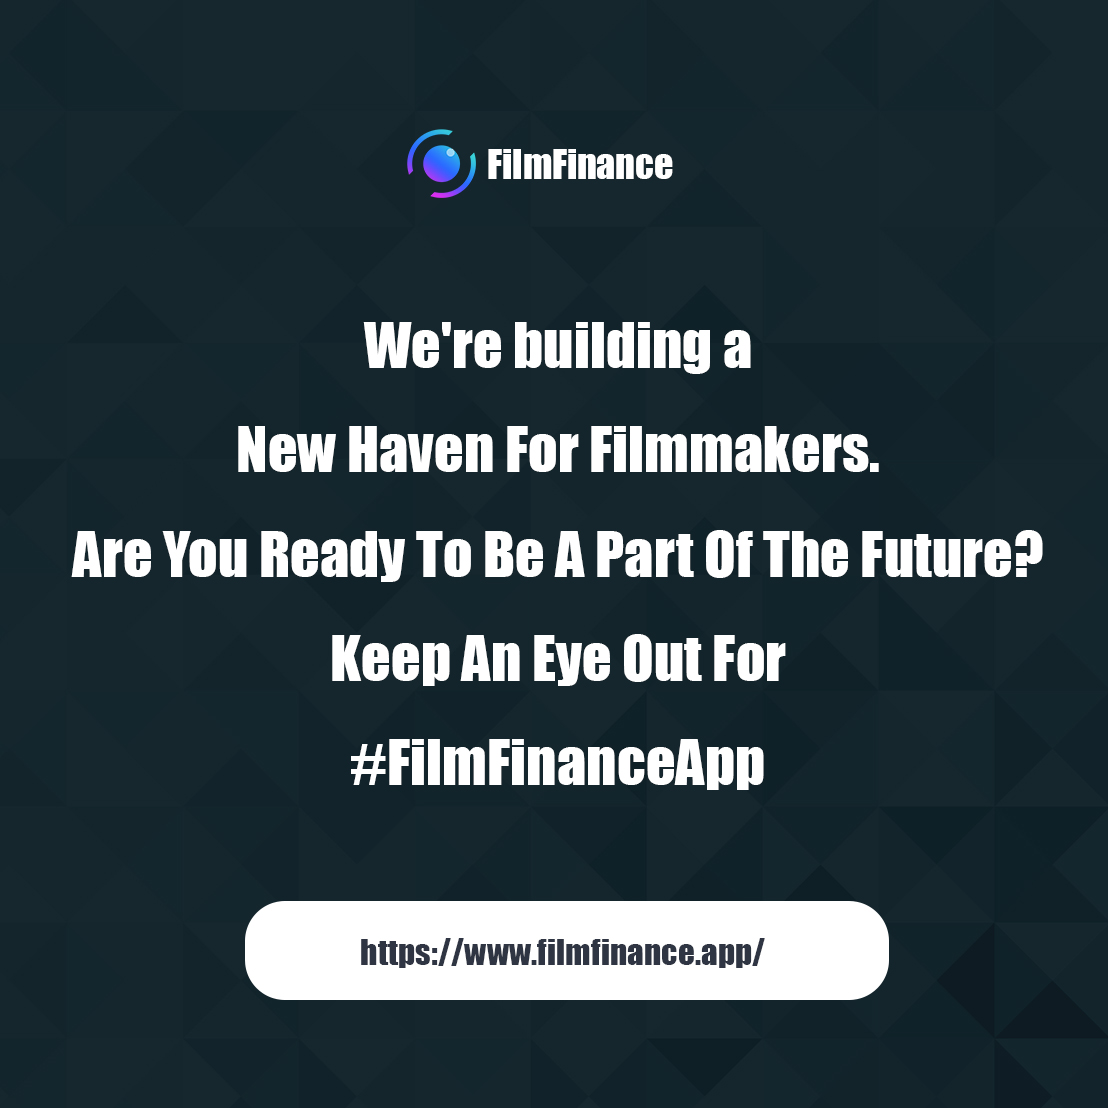 🔨 We're constructing a haven for filmmakers at #FilmFinanceApp 🎥. If you're ready to be a part of the future of film financing, we want you! 👀 Stay tuned for our launch and prepare for a revolution in filmmaking. 🚀 #CinemaMeetsBlockchain #FutureOfFilmmaking #FilmFinanceApp